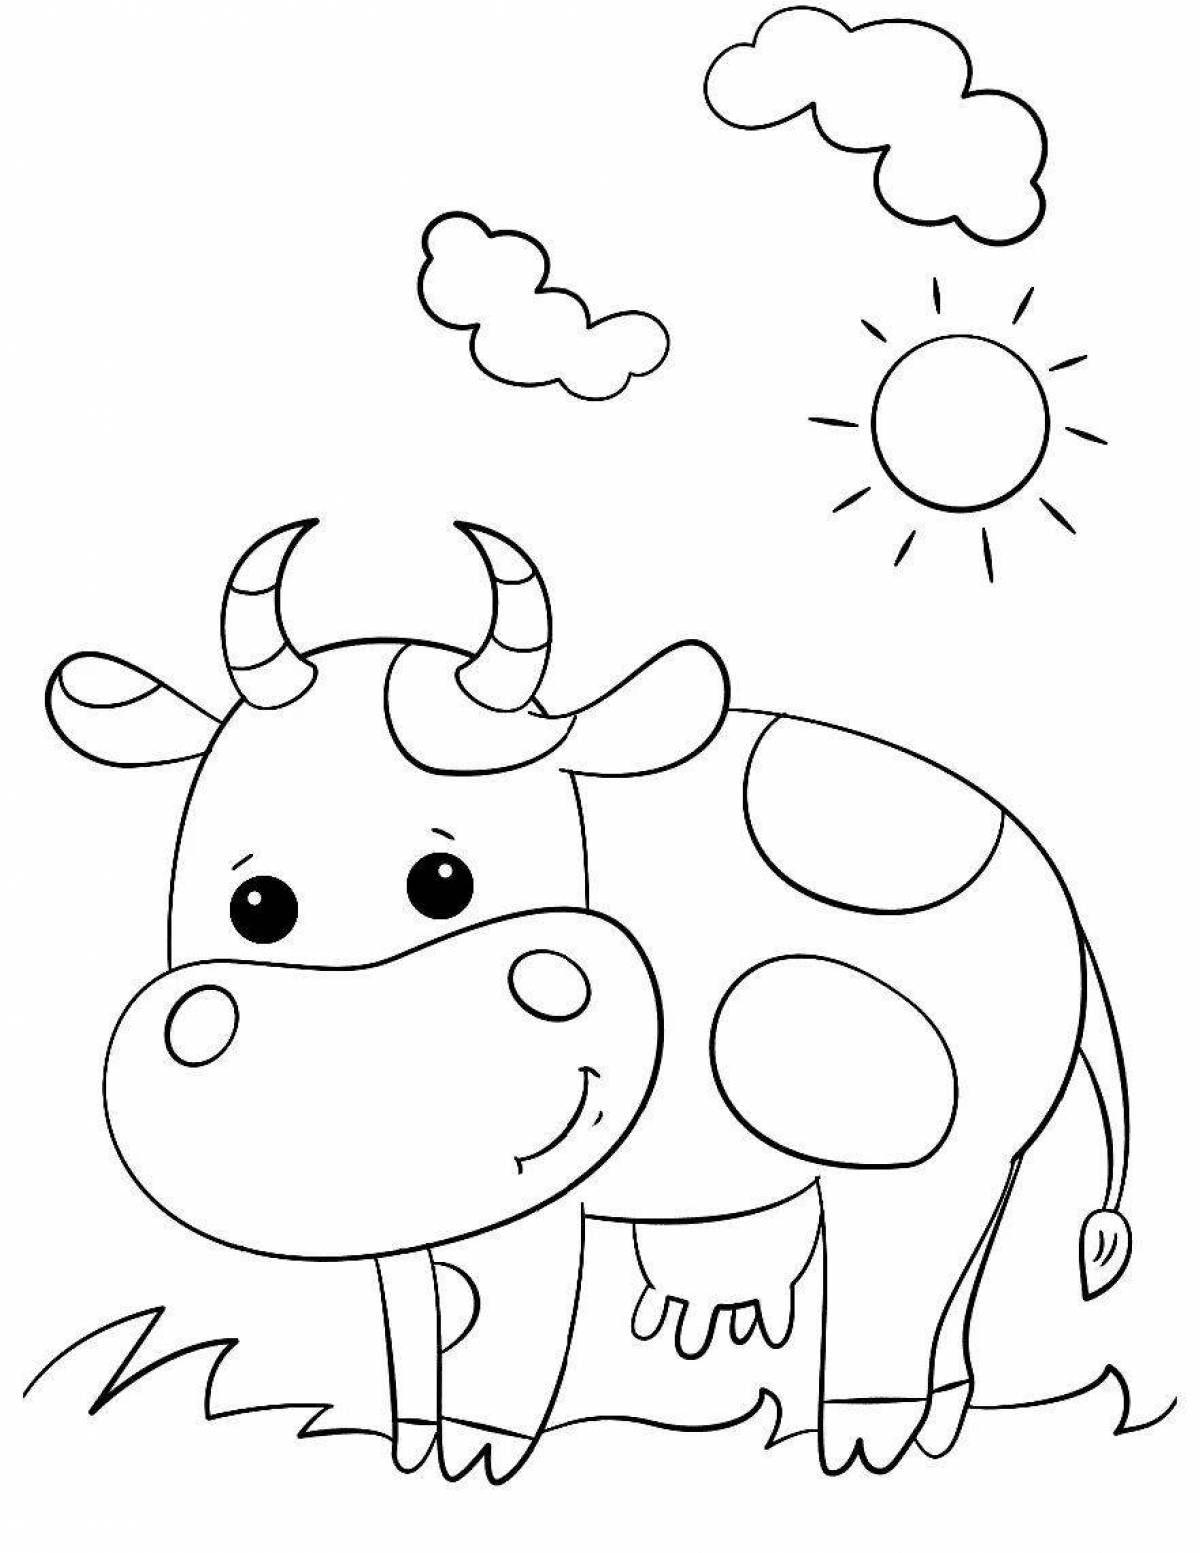 Cow for kids #5